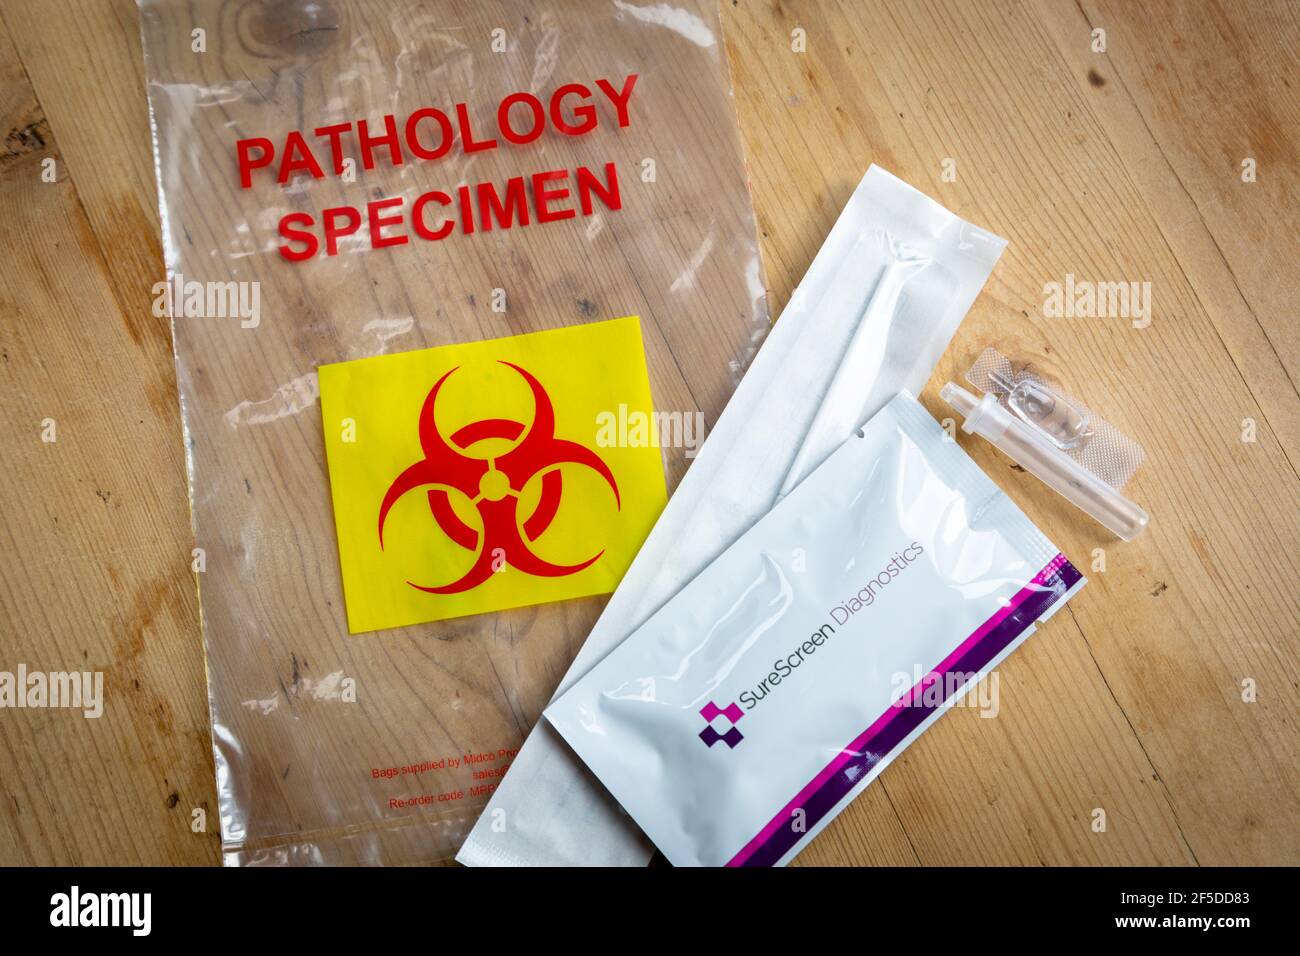 Lateral flow Covid-19 test kit and its components Stock Photo